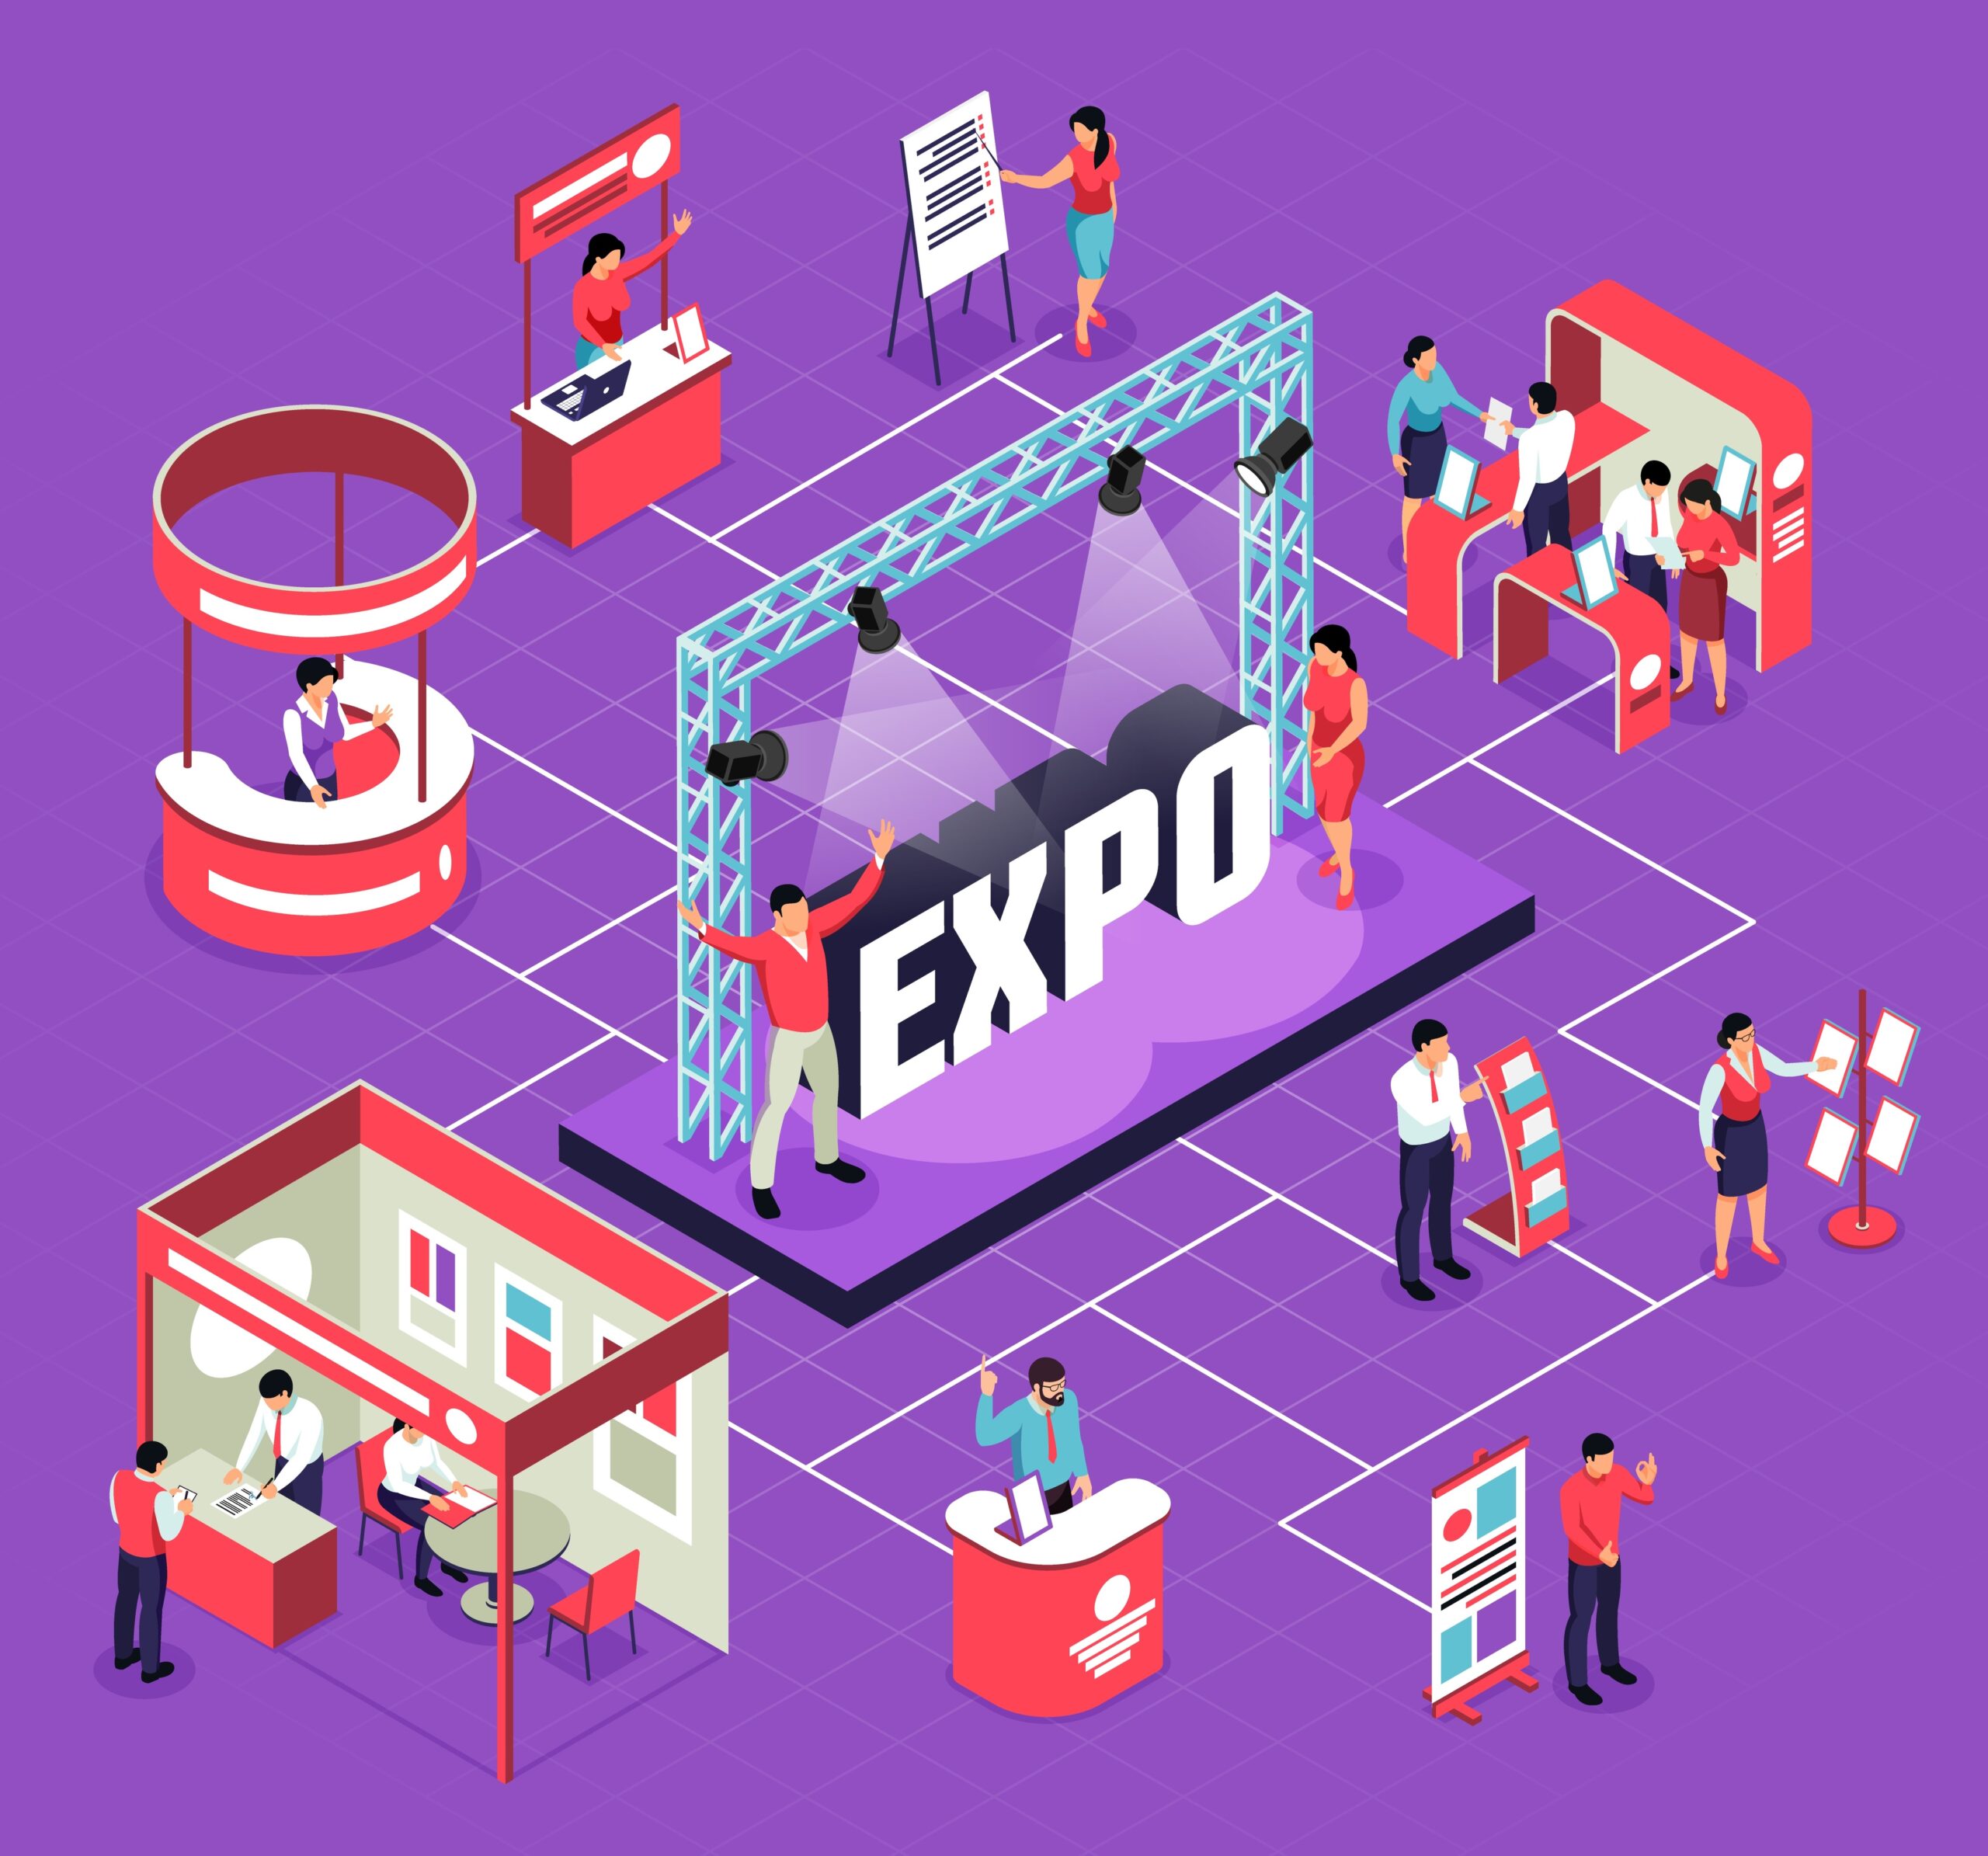 A digitally rendered image of an expo with people standing around and looking at displays or talking to other people